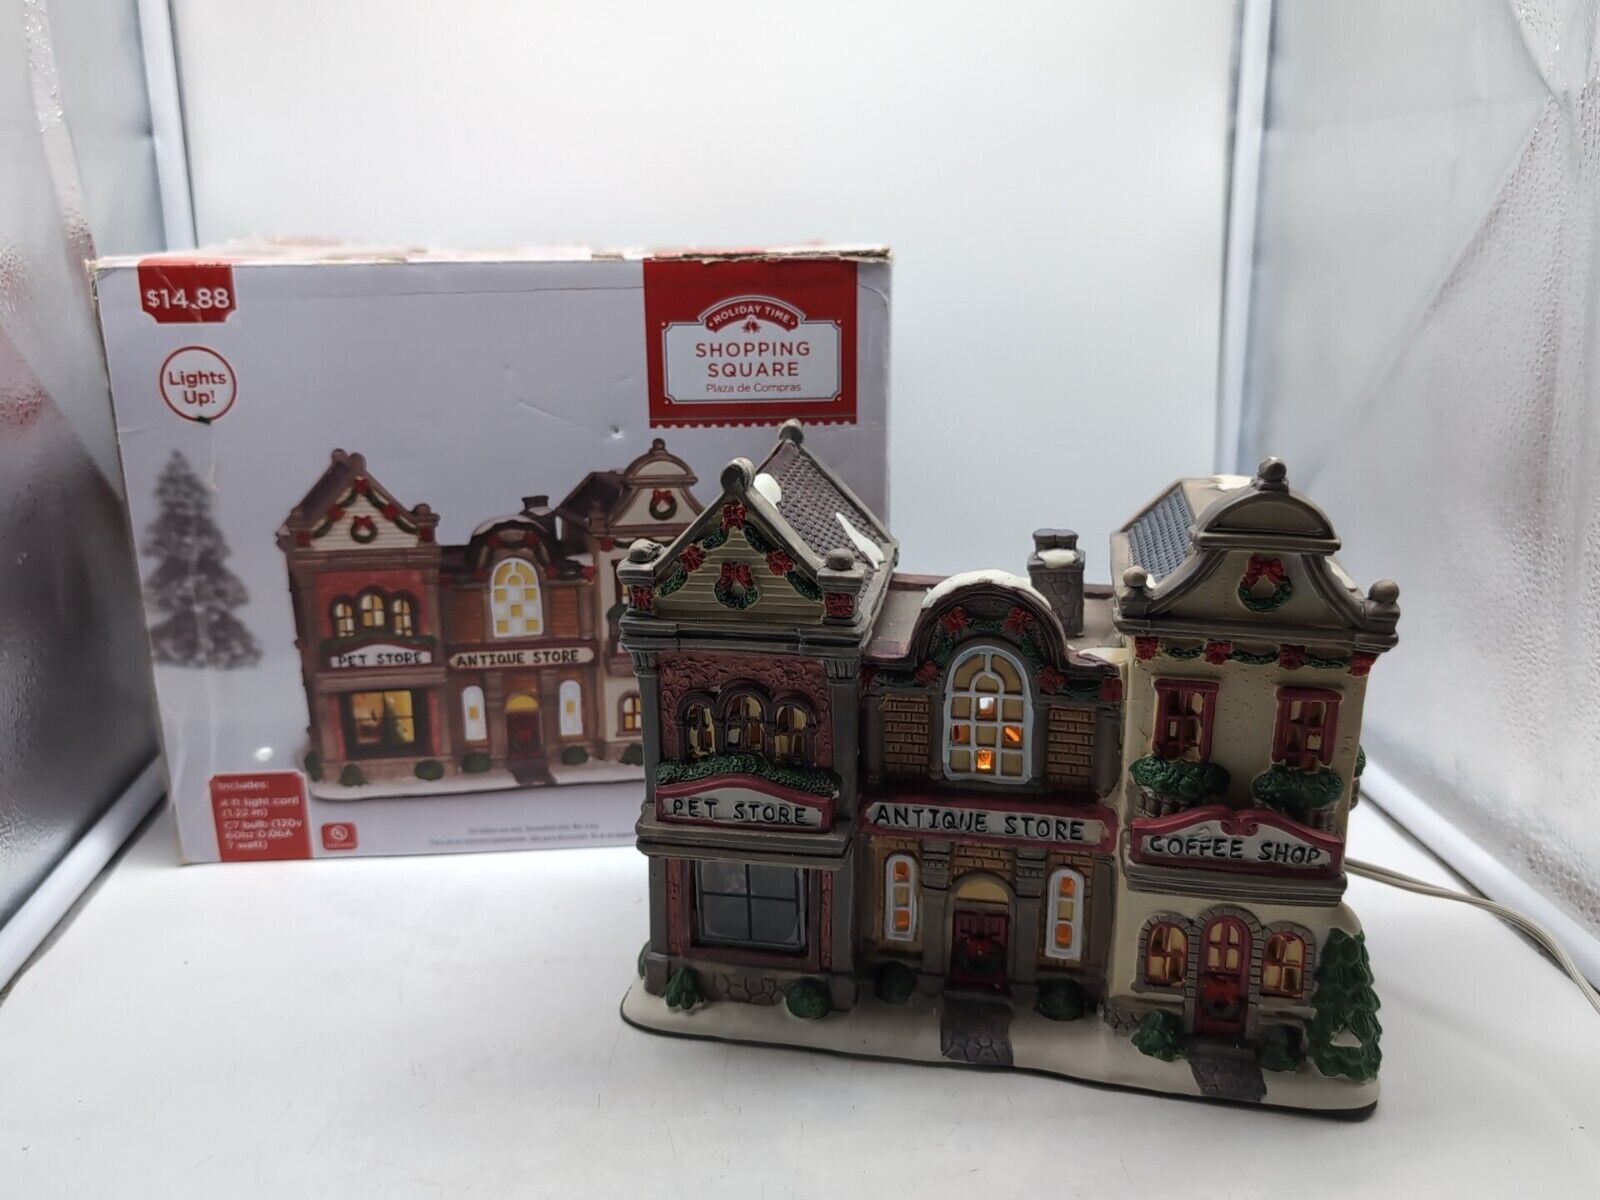 2018 Holiday Time Porcelain Lighted SHOPPING SQUARE Coffee Pet & Antique Stores